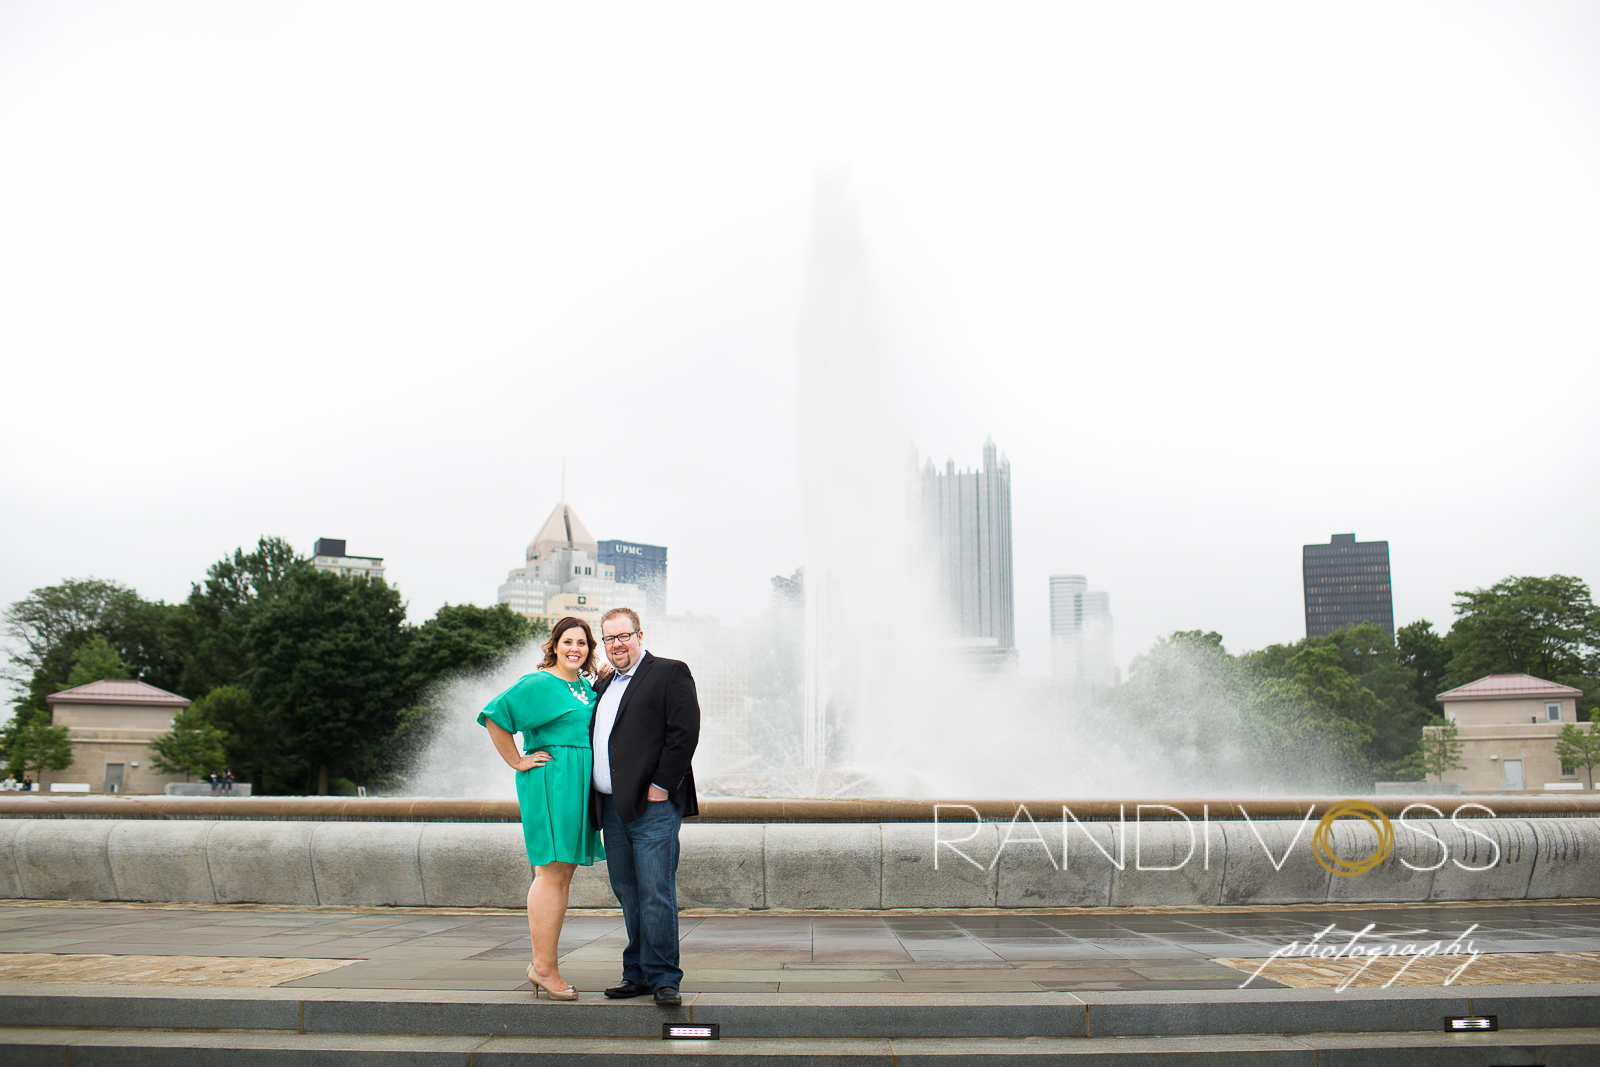 02_Point State Park Clemente Bridge Wedding Photography Pittsburgh_0014